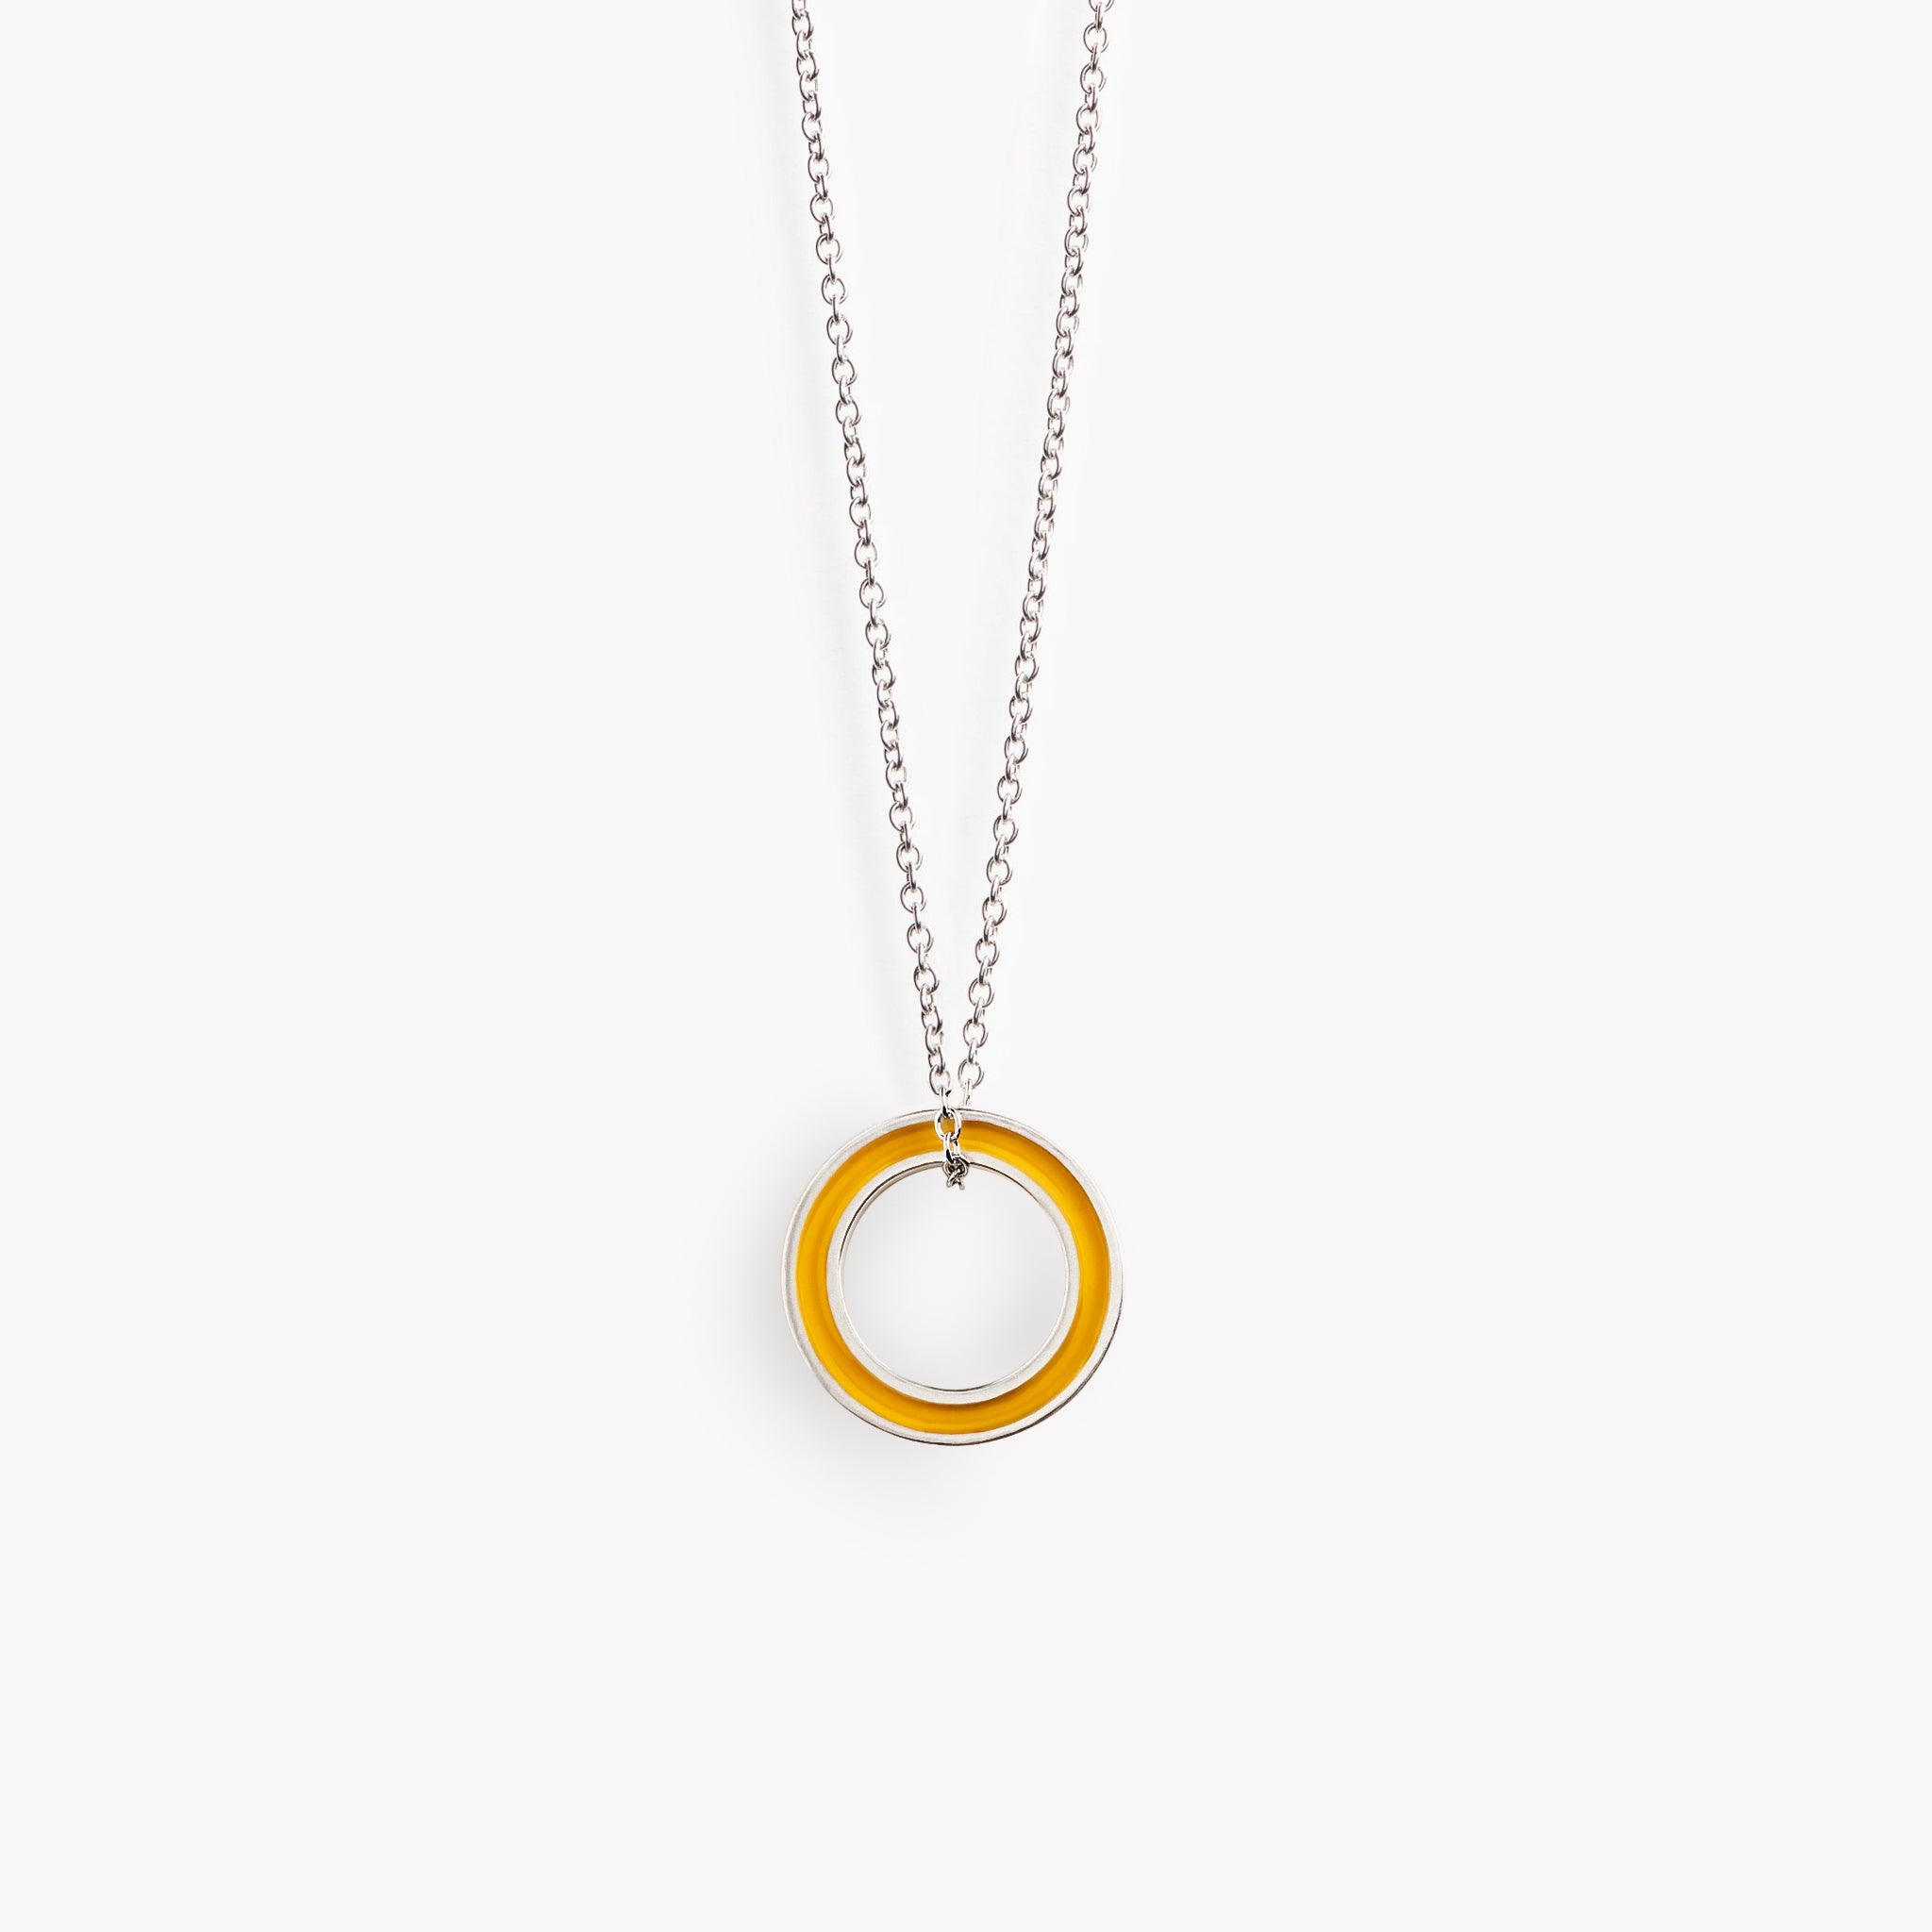 A simple yellow circular necklace on a fine steel trace chain.